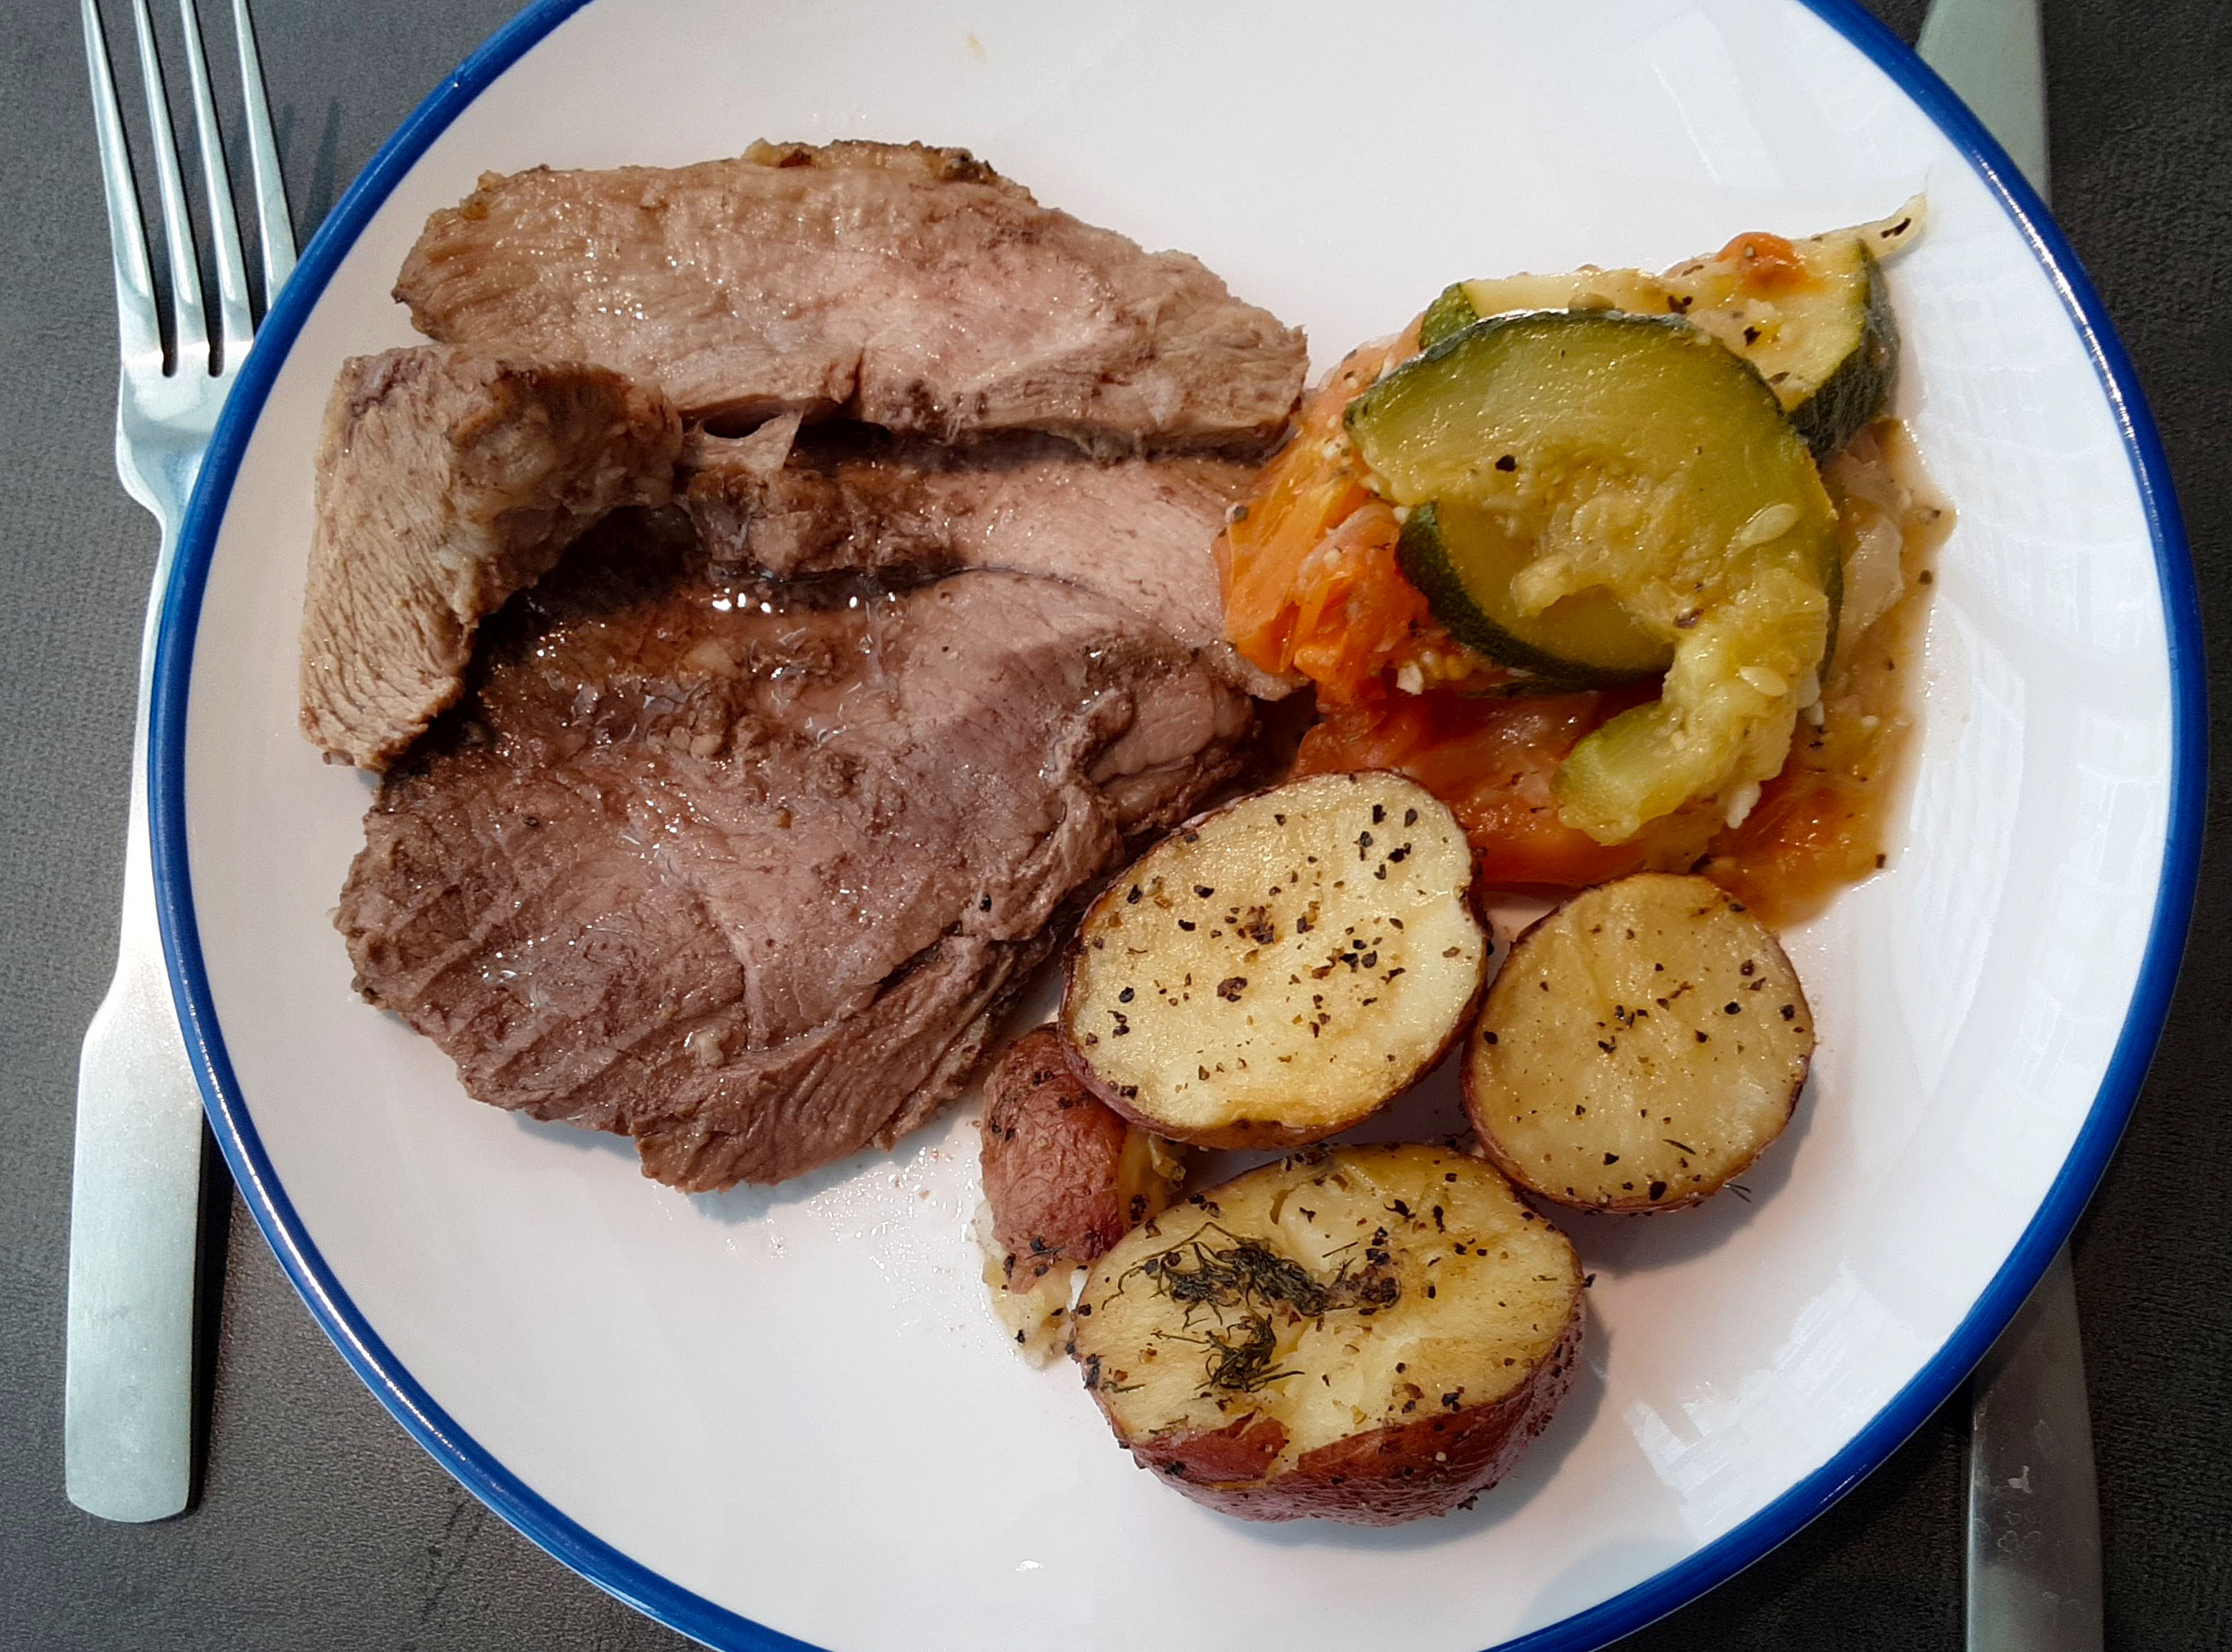 On a circle white plate with a blue rim, there are a few pieces of sliced lamb beside herb roasted potatoes and a side of mushy zucchini. Photo by Paul Young.